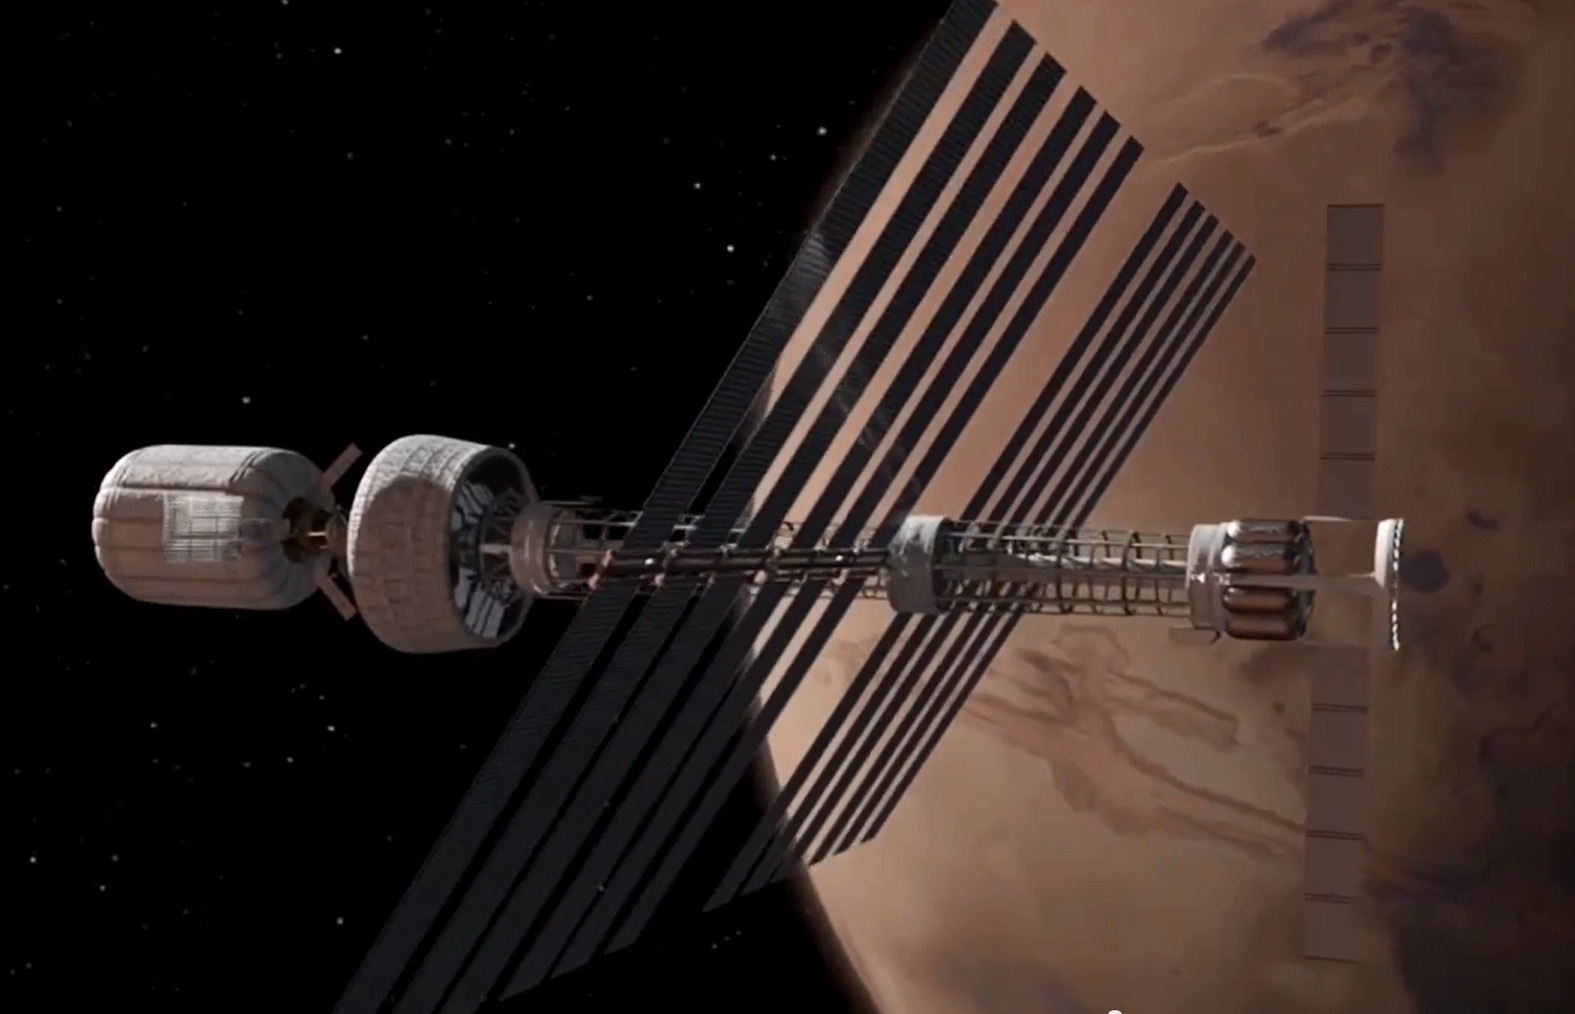 The Path to Mars: Boeing Leading Charge in Deep Space Mission